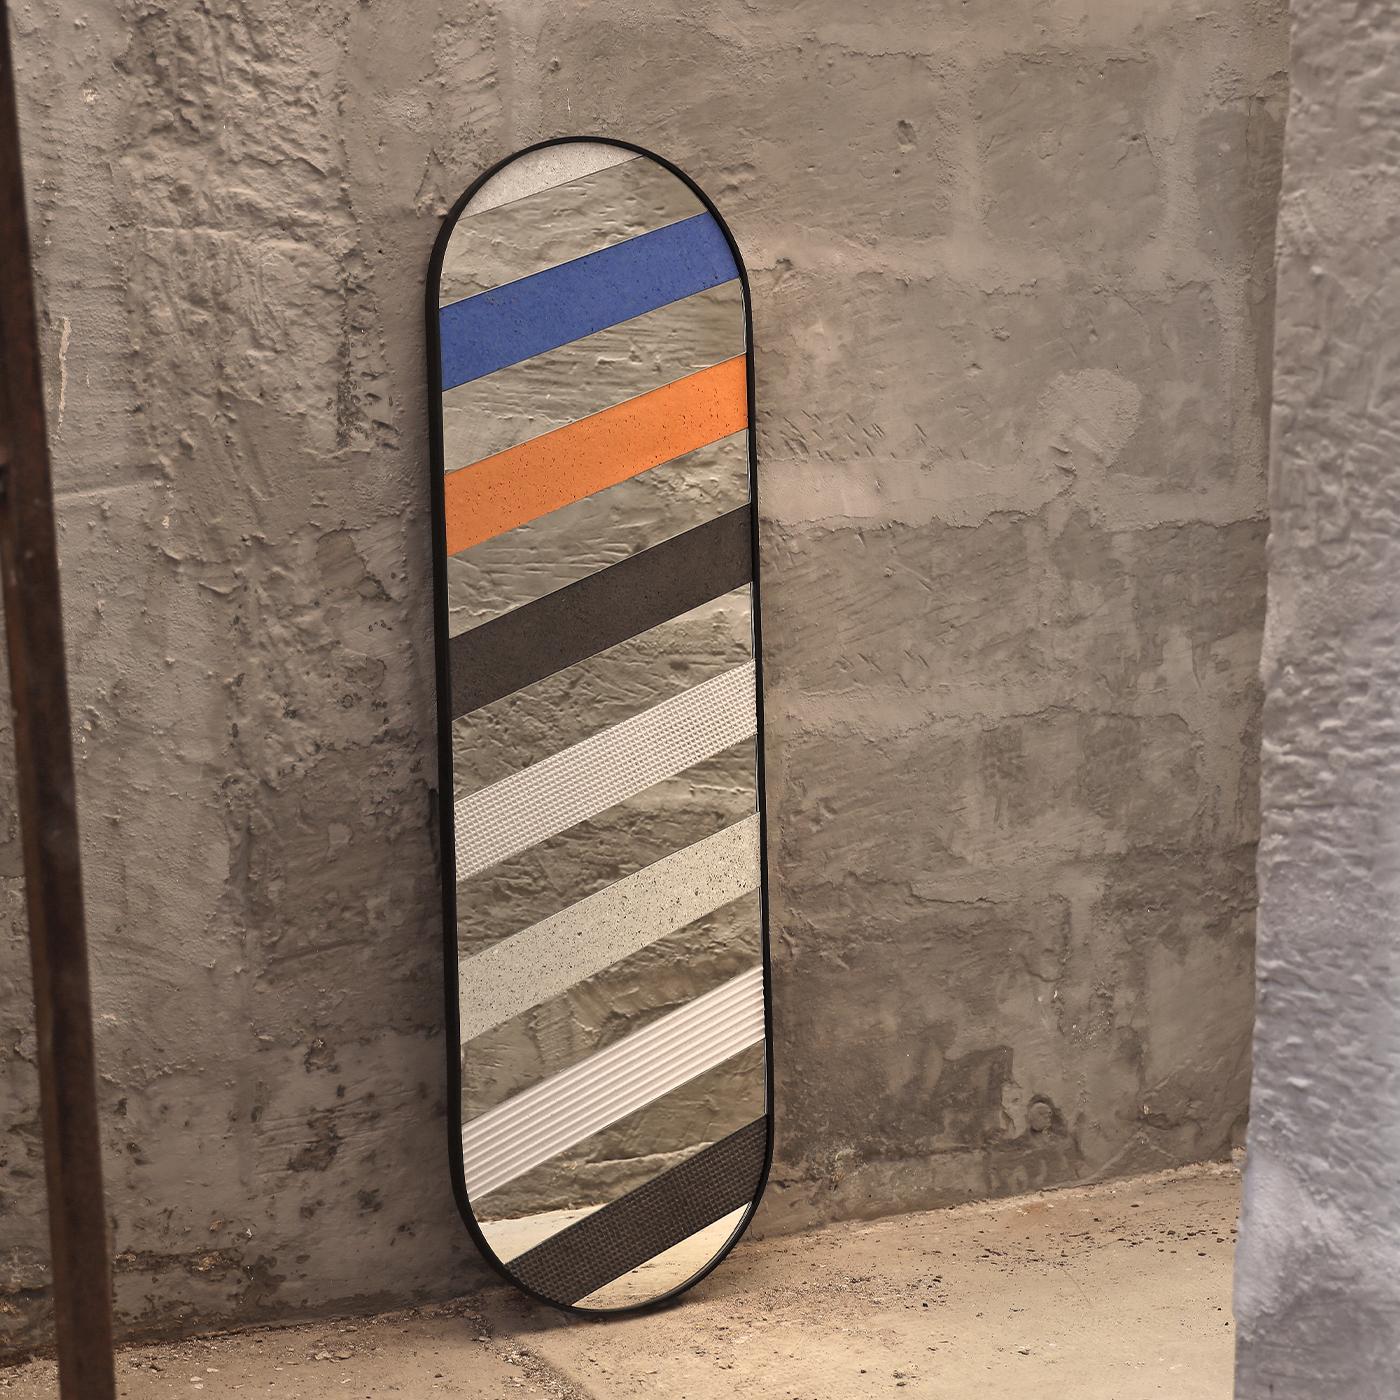 Brimming with artistic flair, this superb mirror is distinguished by the artful incorporation of oblique stripes with different textures and colors obtained from recycled paper. Attention to sustainability standards is also revealed by the choice of